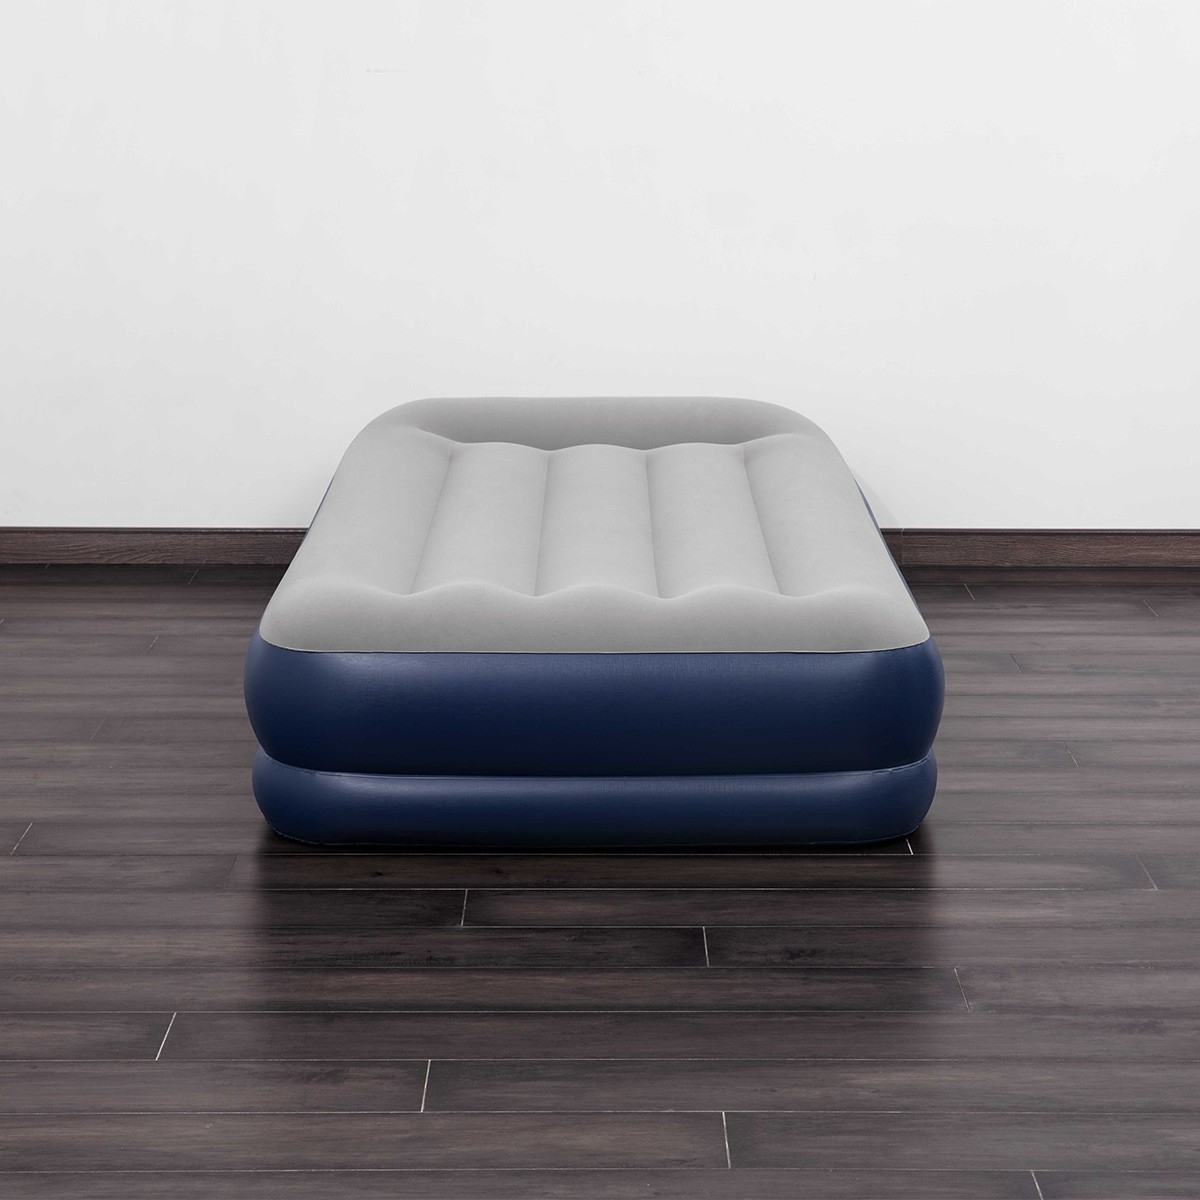 Bestway Inflatable Bed Single Size Air Mattress with Built-in Pump and Pillow